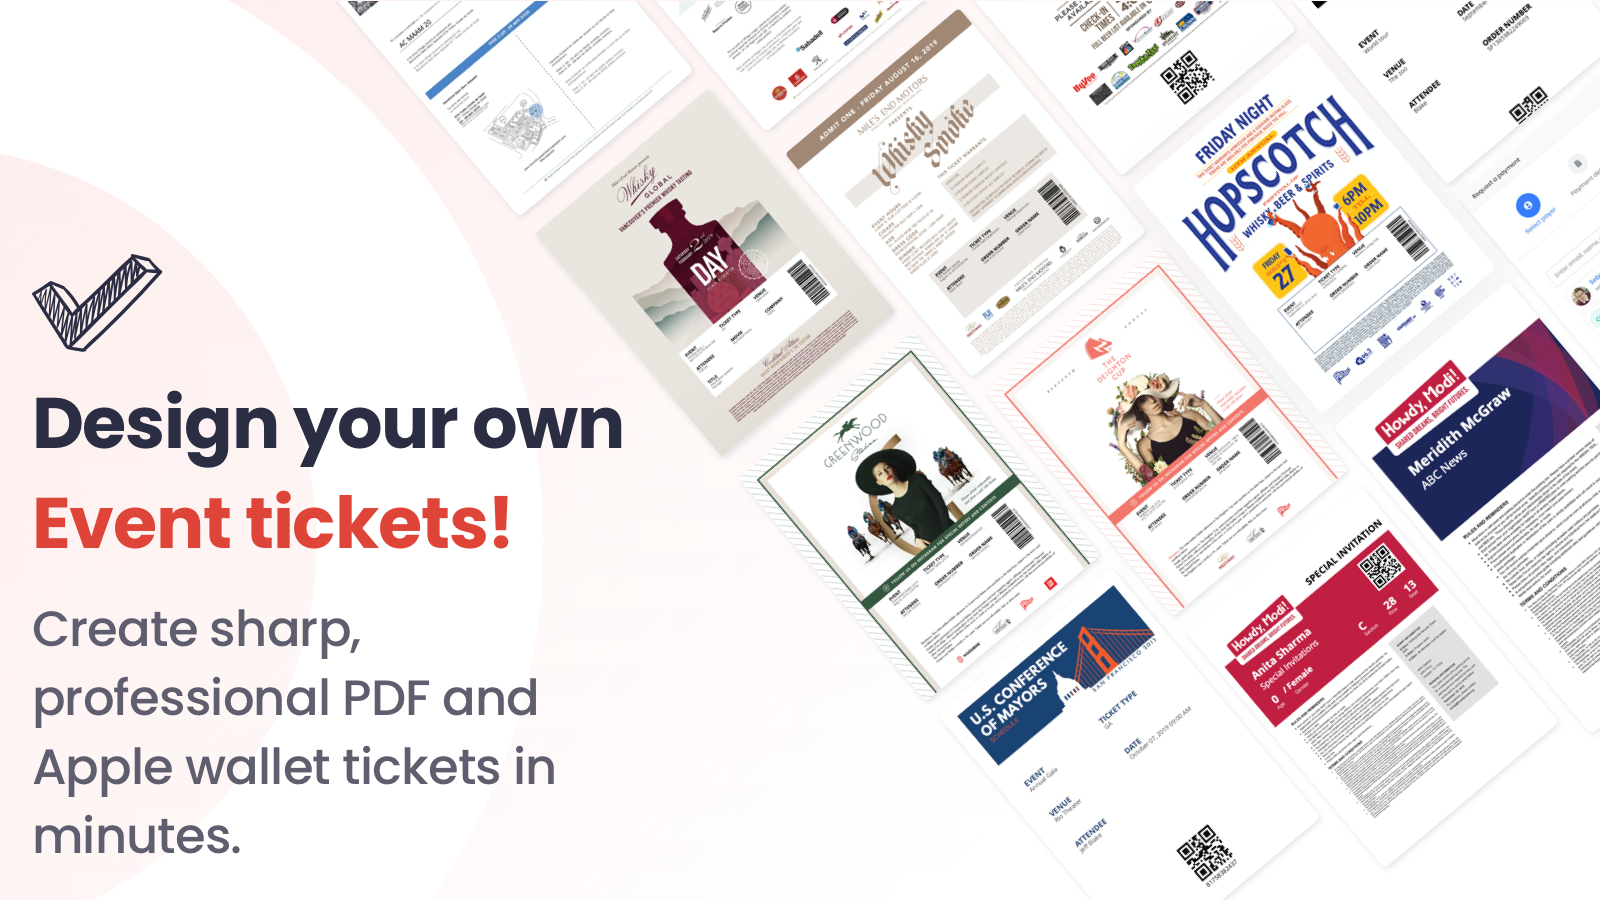 Design and brand your own PDF and Apple wallet tickets